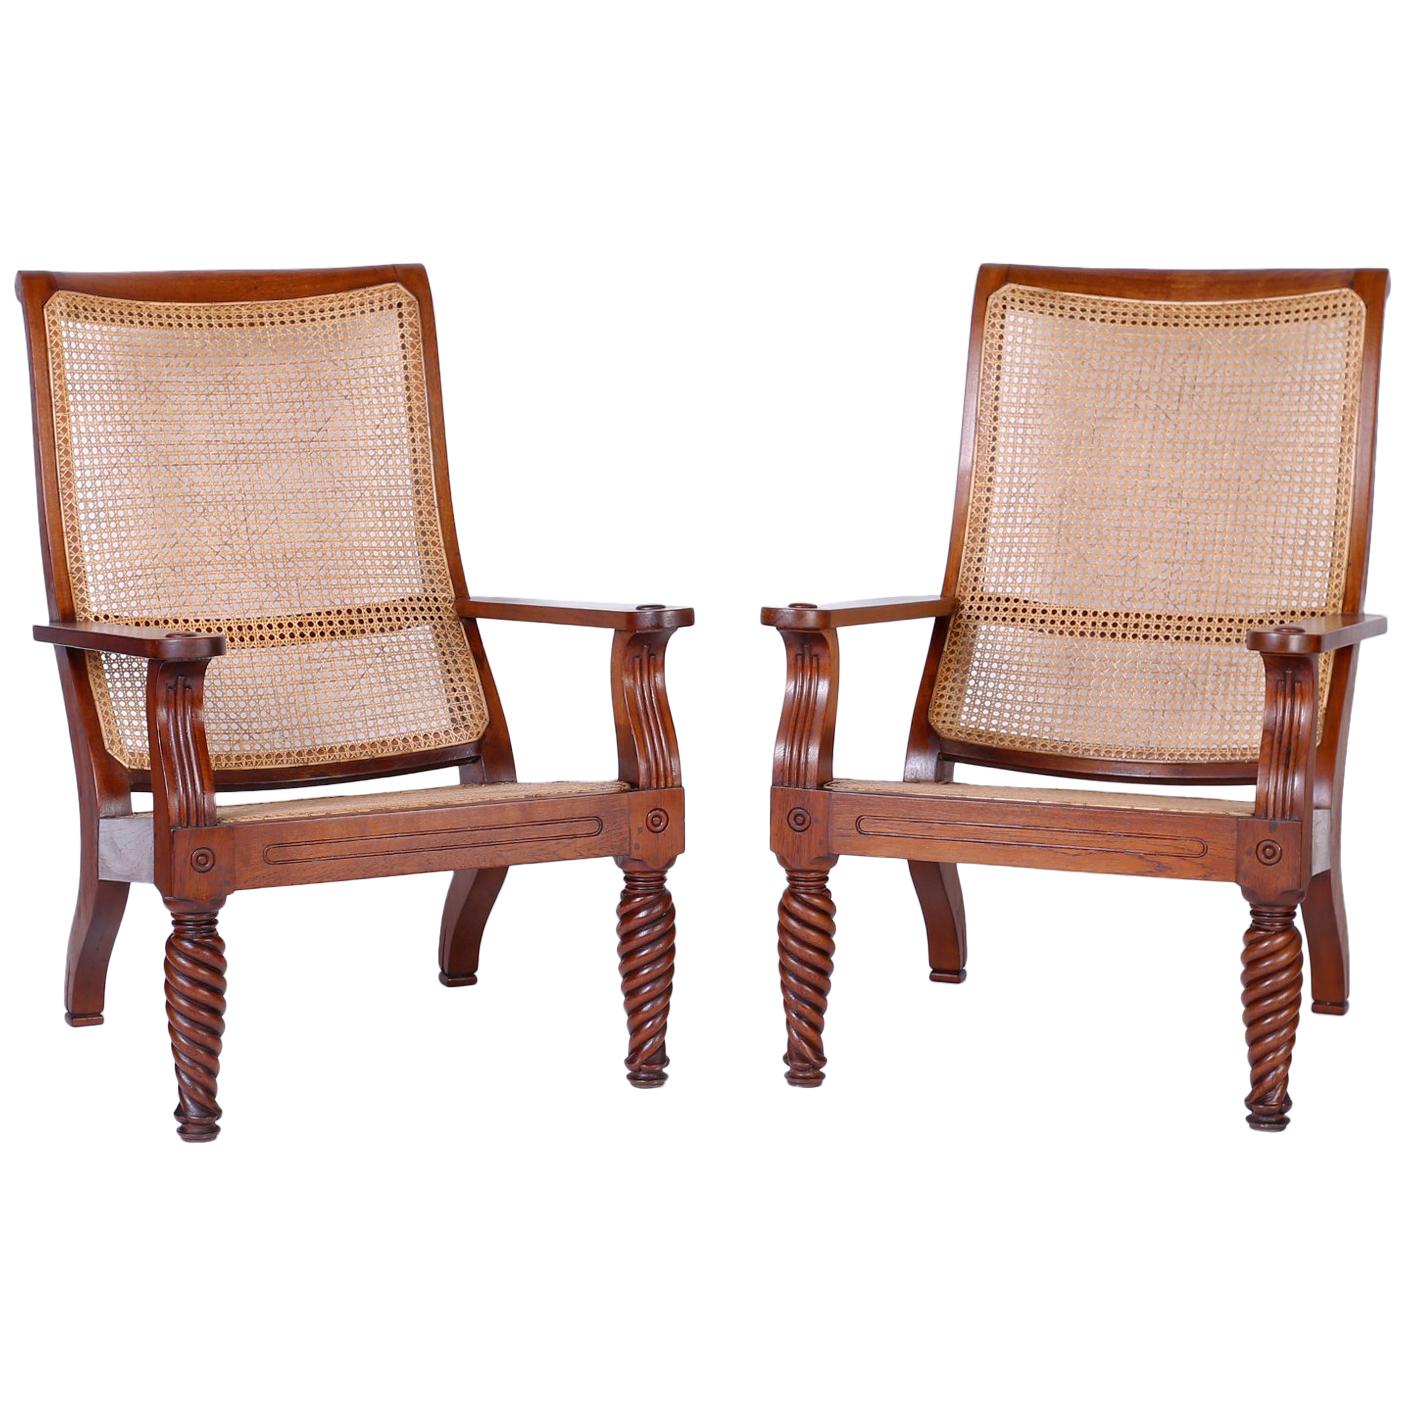 Pair of Antique Anglo-Indian Plantation Chairs